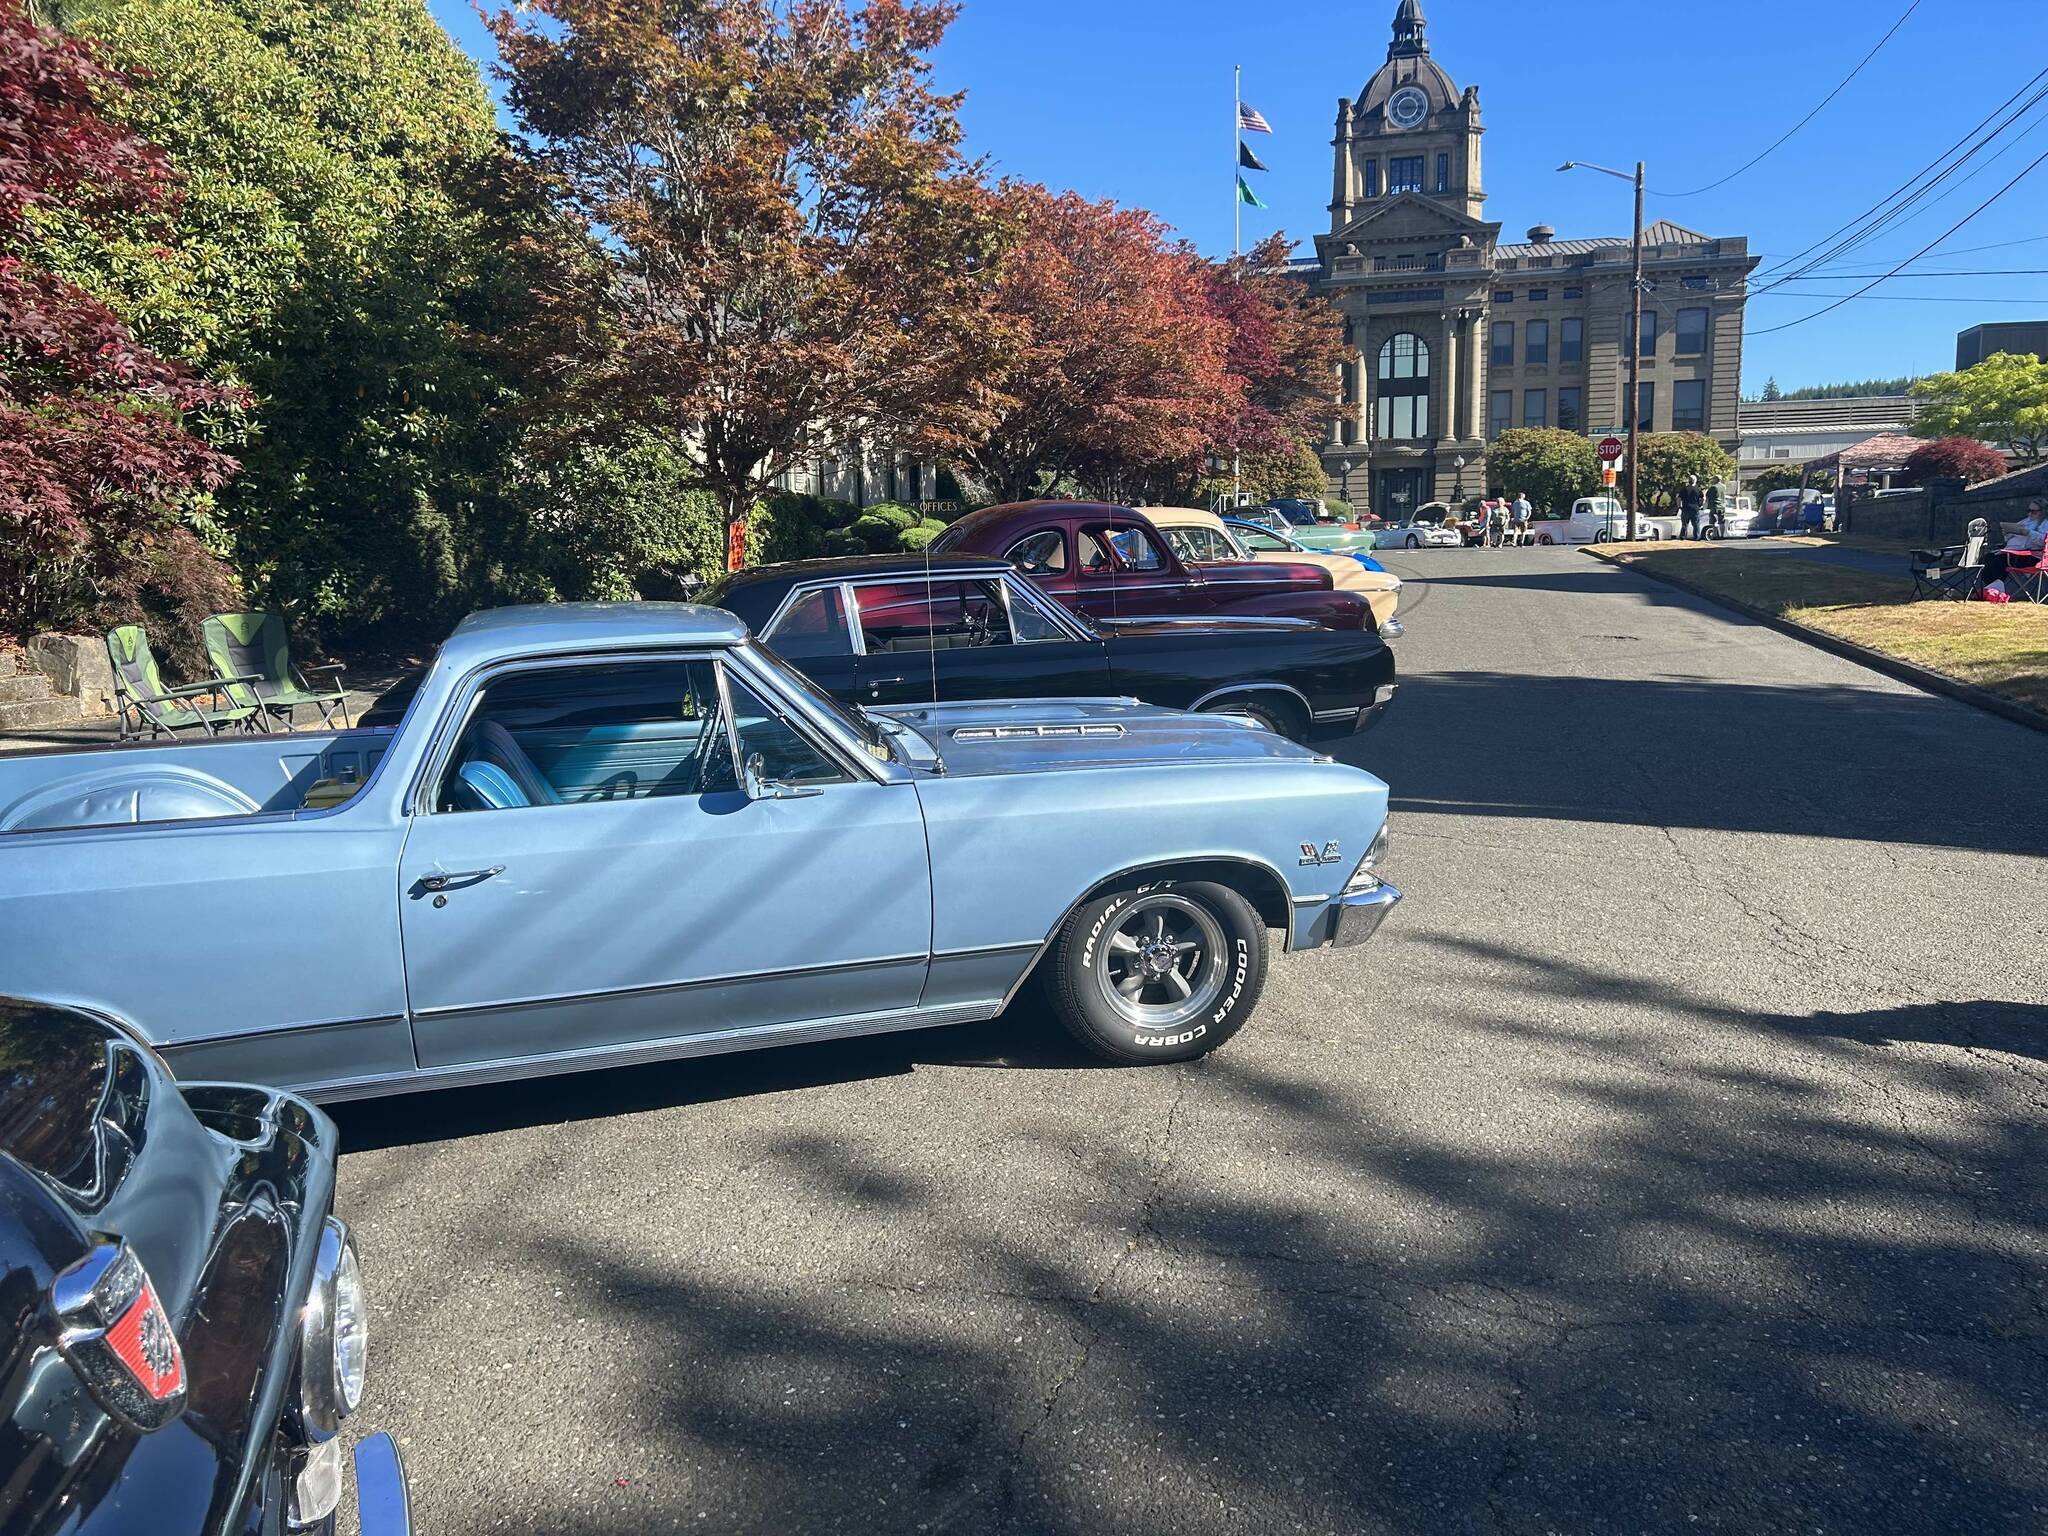 Classic automobiles line the streets in front of the county courthouse for the Historica Montesano Car Show on July 15. (Lillian Saeger / The Daily World)